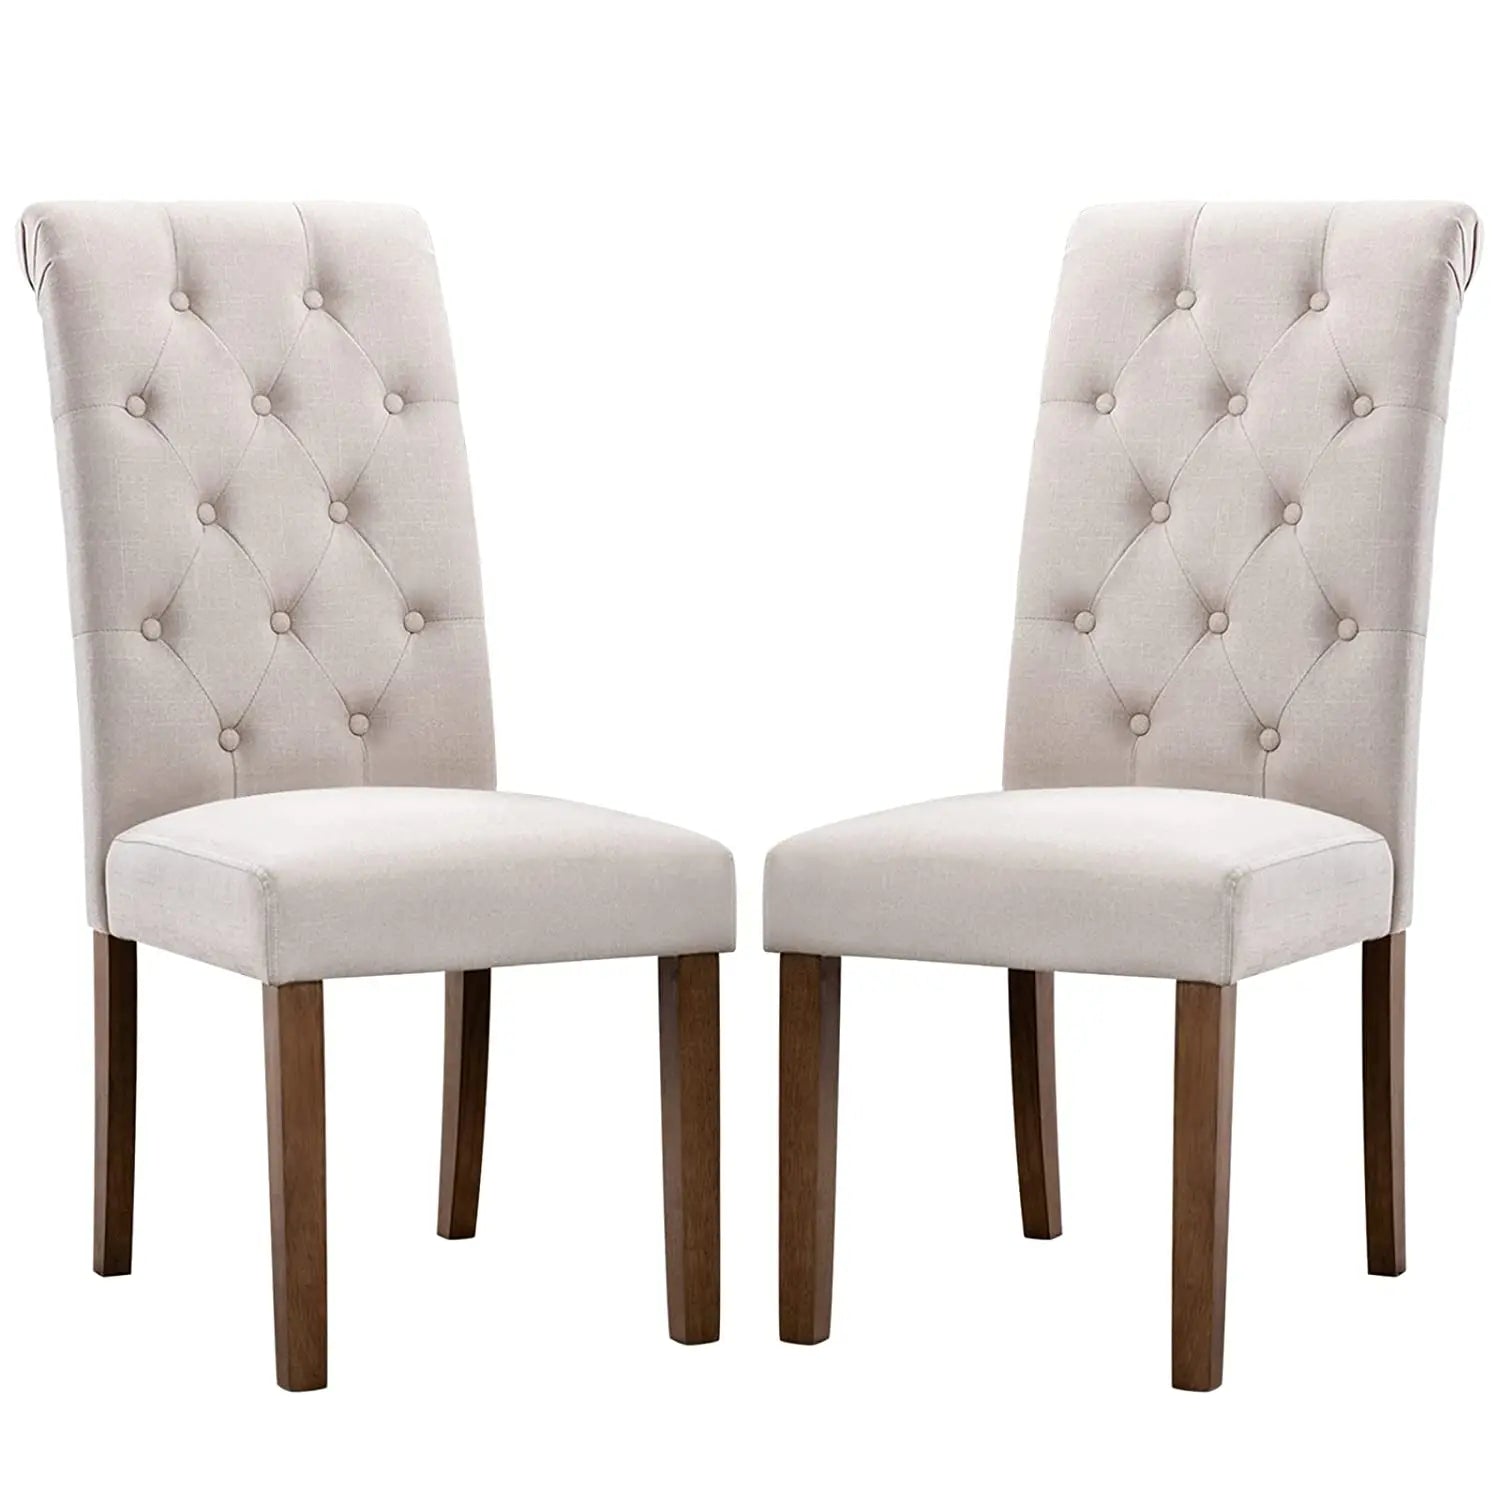 Dining Chair Clob- Wooden Handmade Button Tufted Teak Wood Chair for Dining Table, Office Chair Upholstery Chair for Living room (Set of 2) Furneez